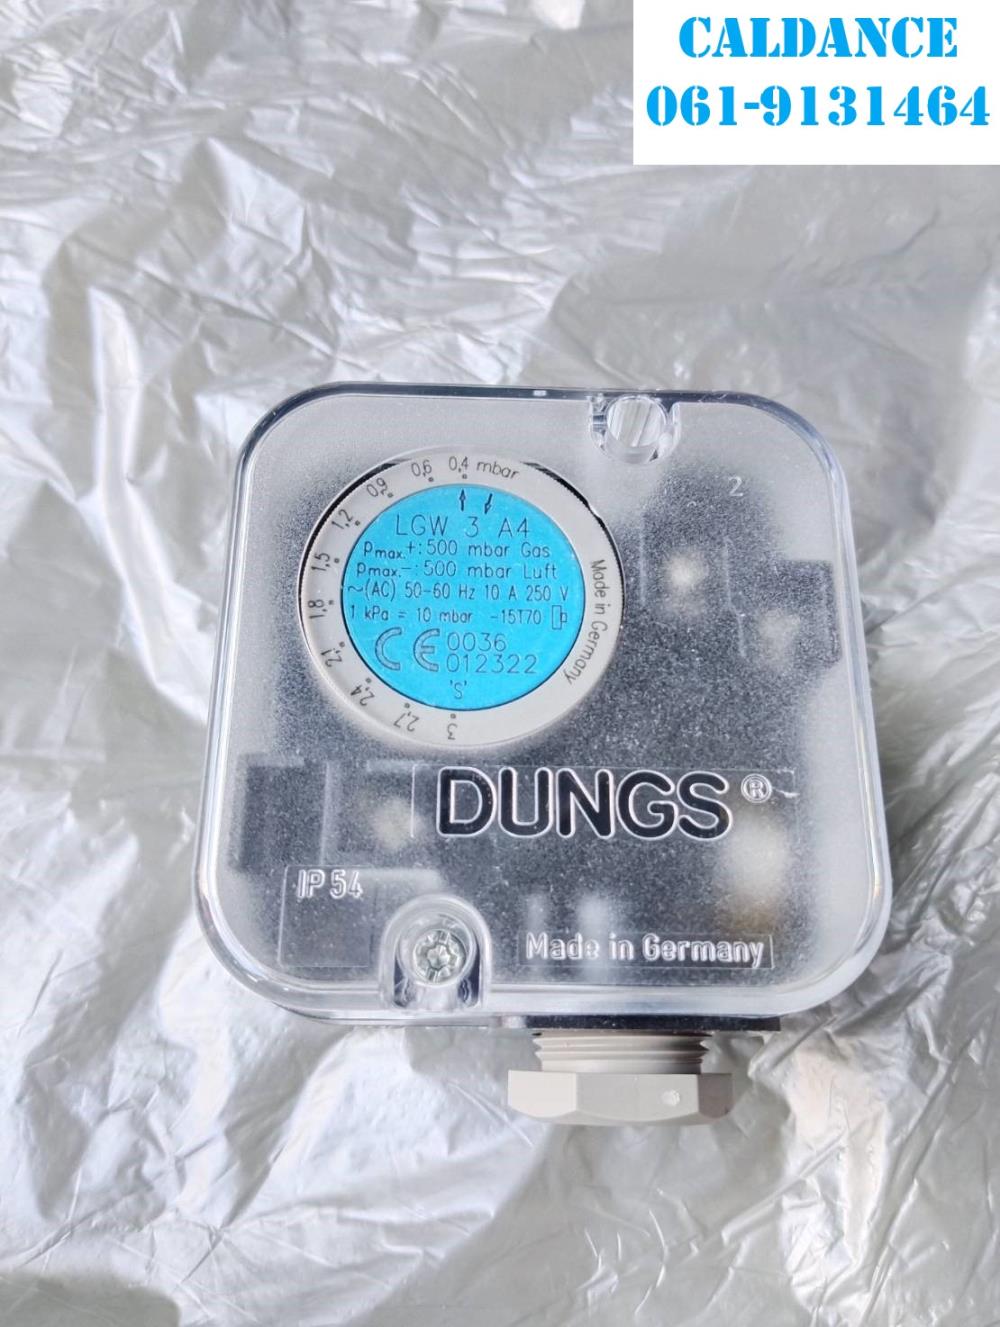 "DUNGS" Pressure Switch LGW 3 A4,"DUNGS" Pressure Switch LGW 3 A4,"DUNGS" Pressure Switch LGW 3 A4,Instruments and Controls/Switches